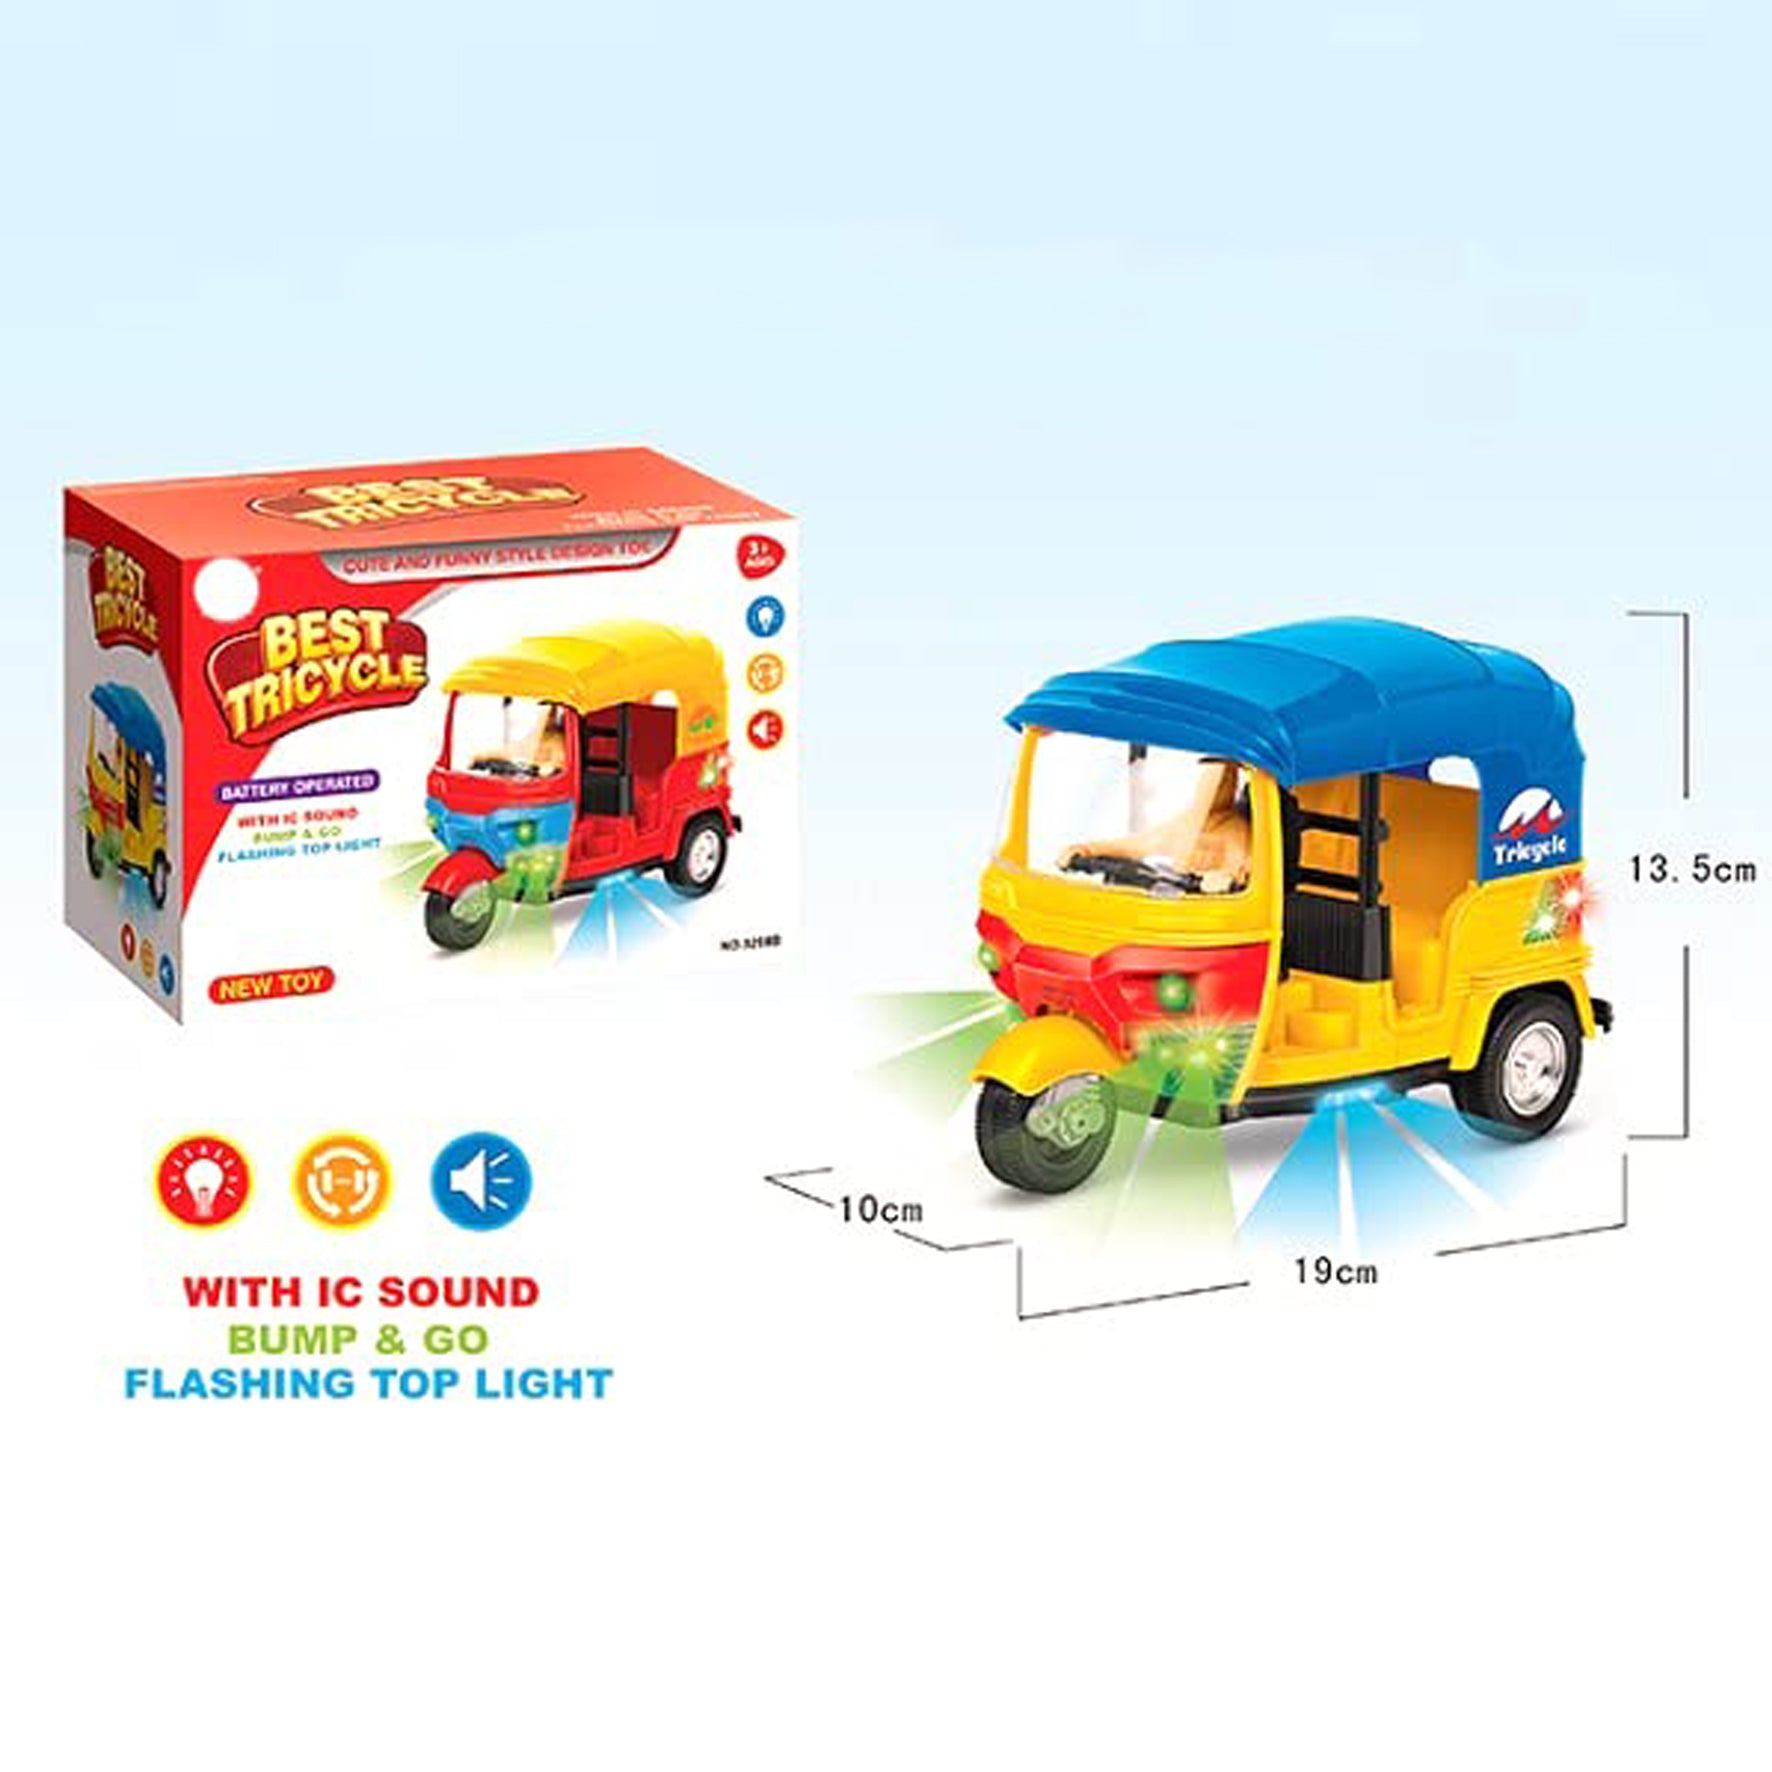 attery Operated auto Rickshaw Tricycle Toy for Kids|Boys|Girls with Light & Music and Bump & go Action (Color-Multi).